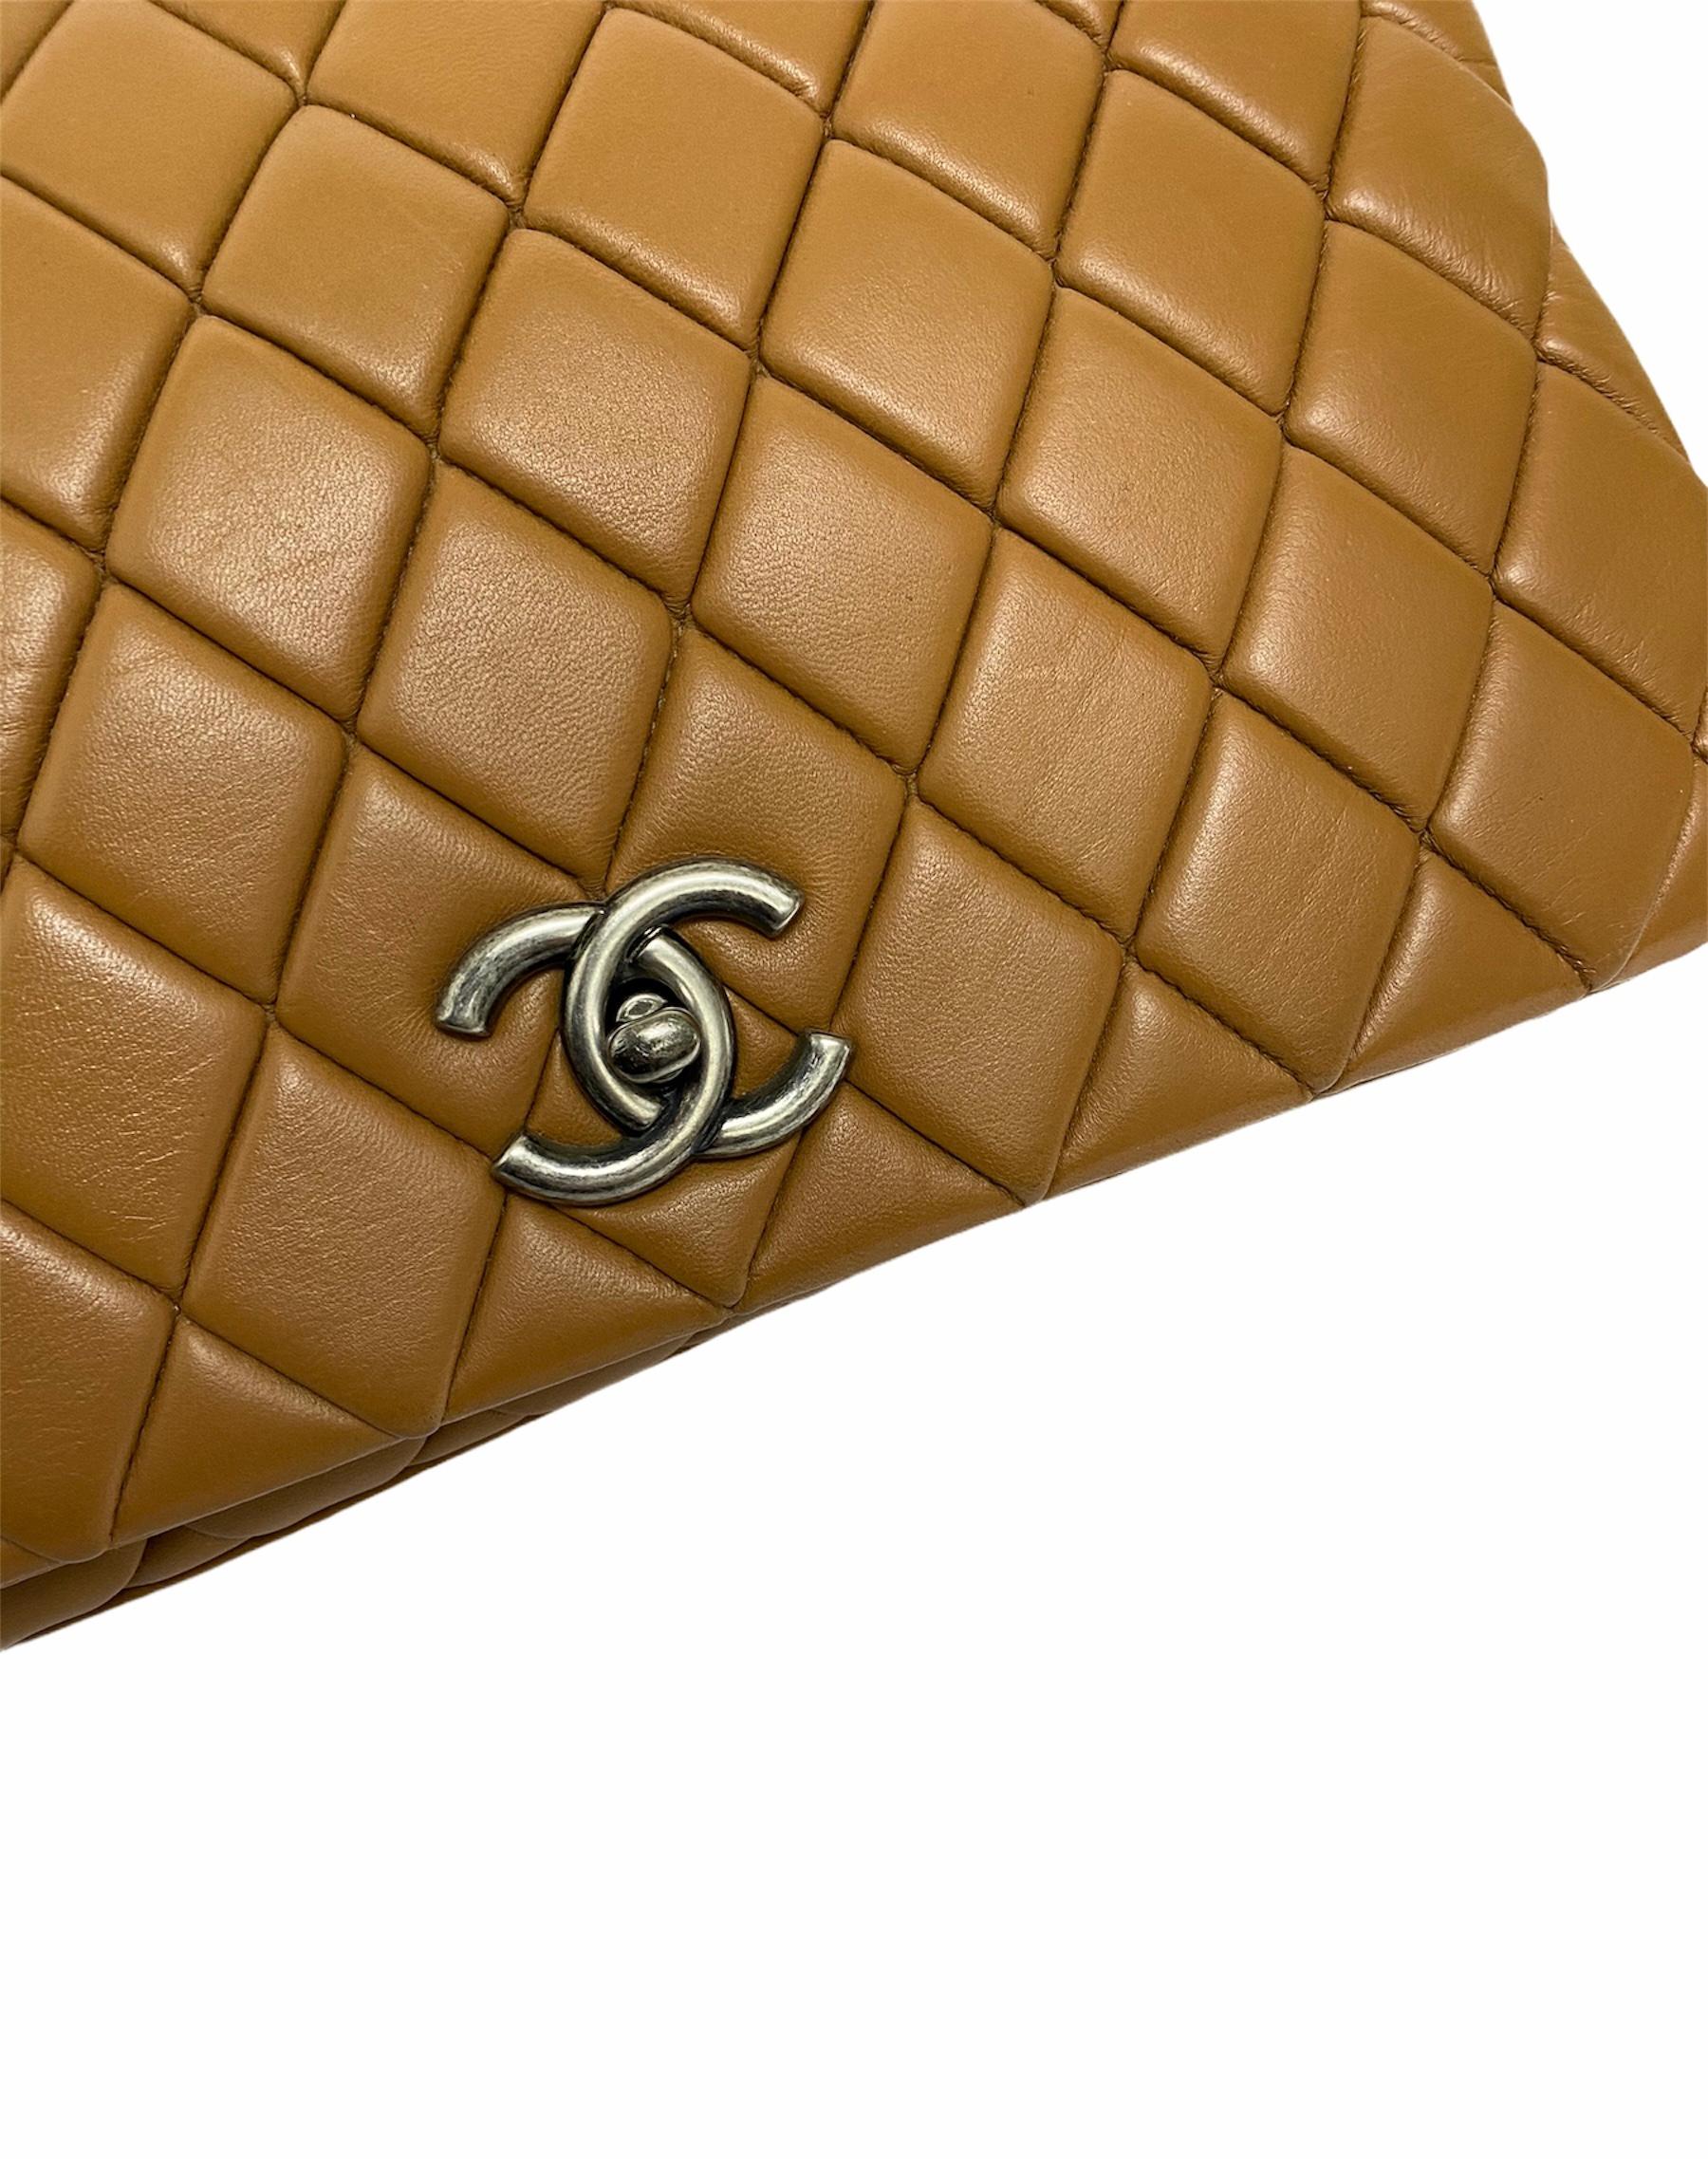 Women's Chanel Flap Bag in Brown Leather with Silver Hardware